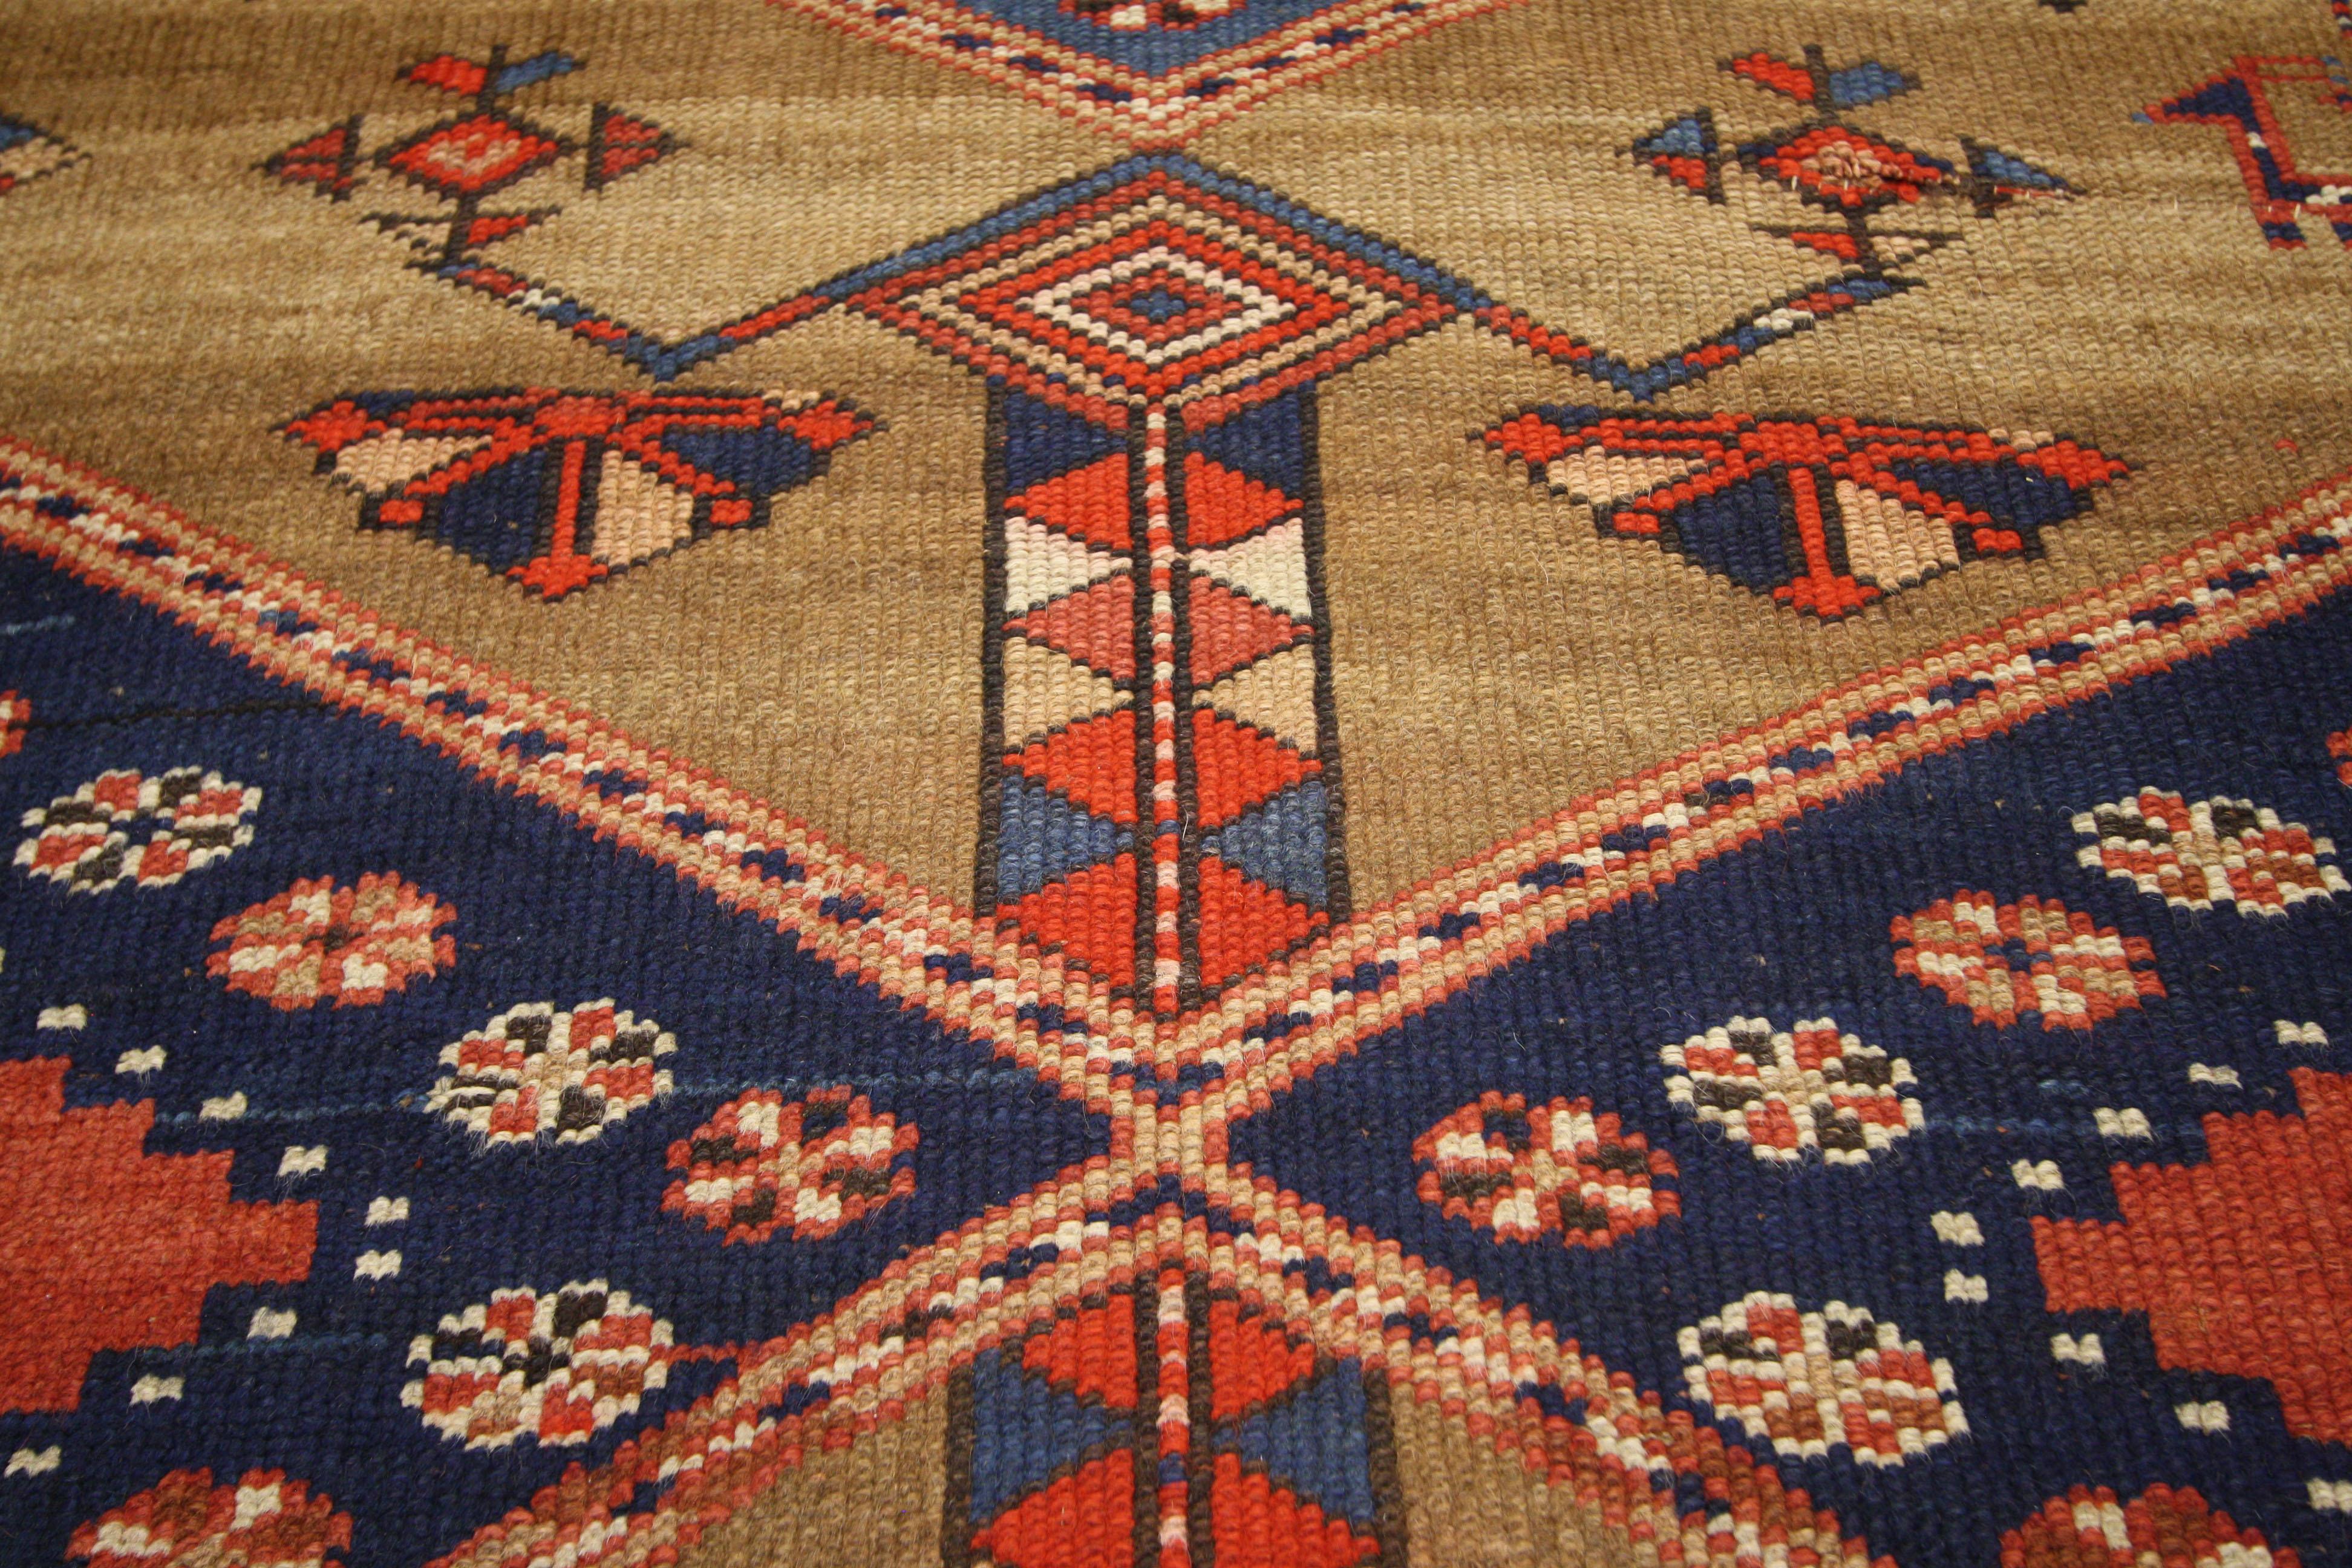 73991, antique Persian Sarab runner, Tribal style hallway runner. Striking tribal balanced with chic modern, this antique Persian Sarab runner displays the unique attributes of Persian tribal weaving. A geometric pattern of bright hexagons and